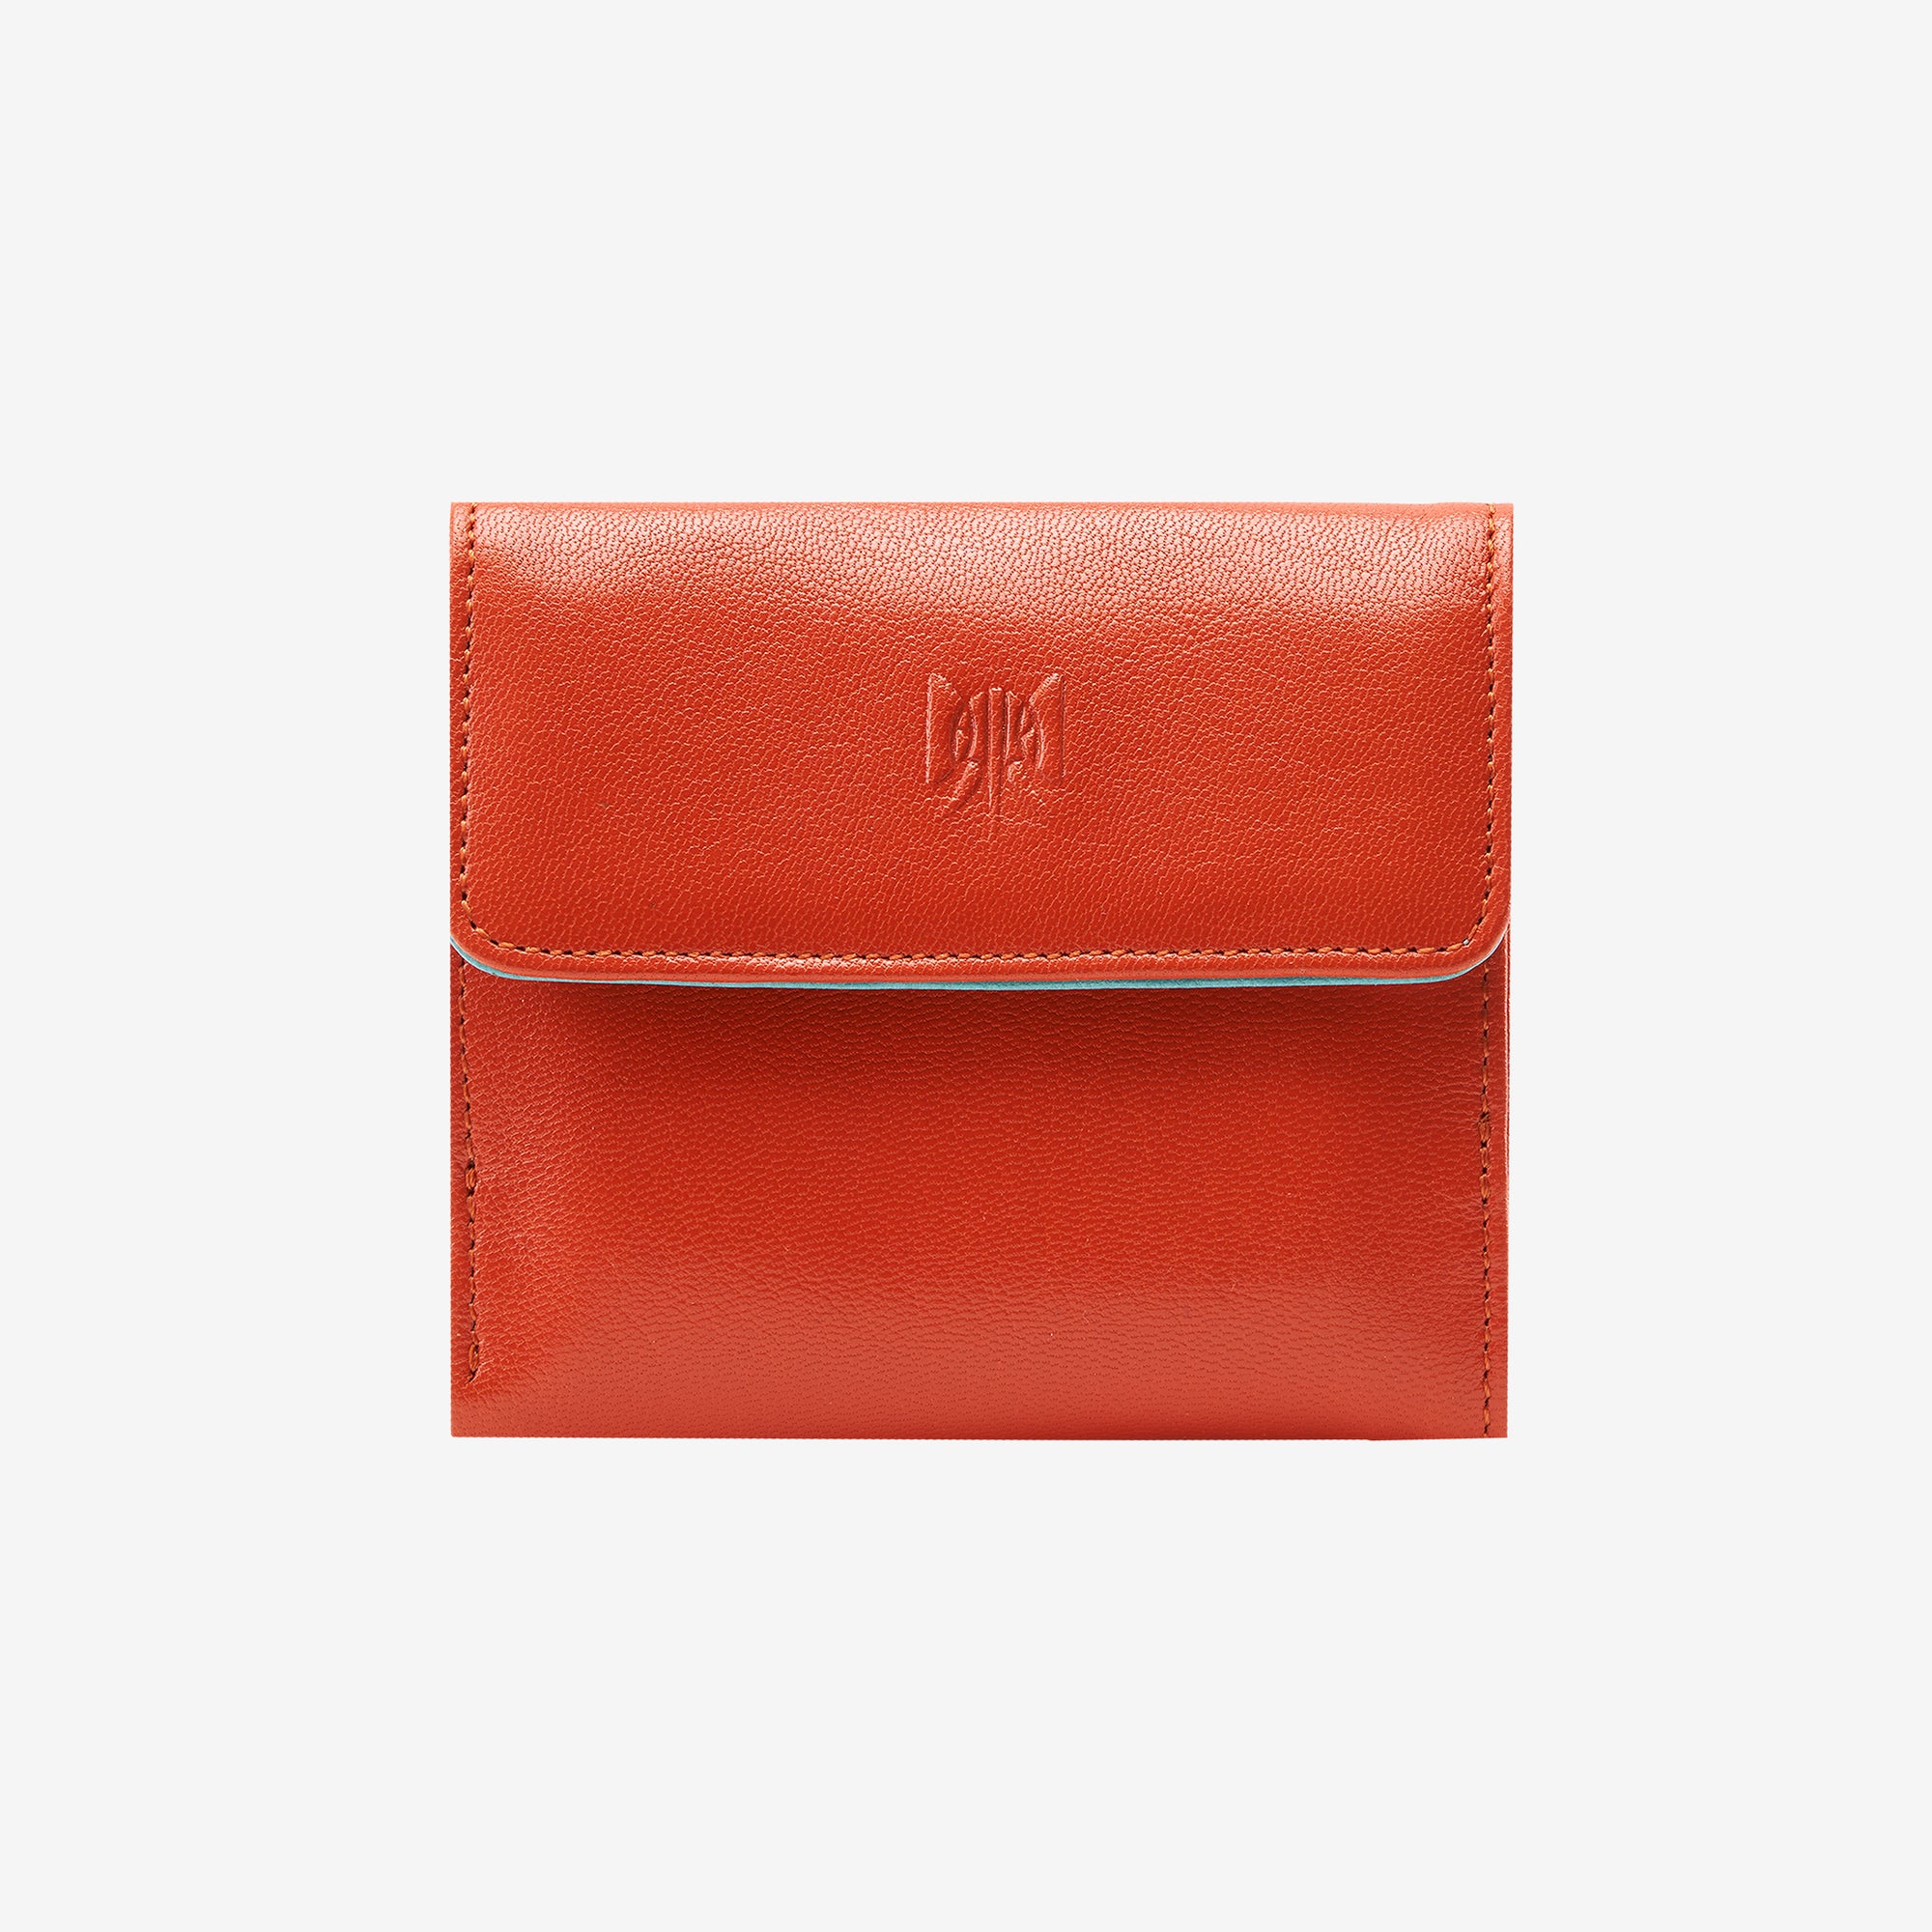     tusk-461-siam-leather-indexer-wallet-orange-and-sky-front